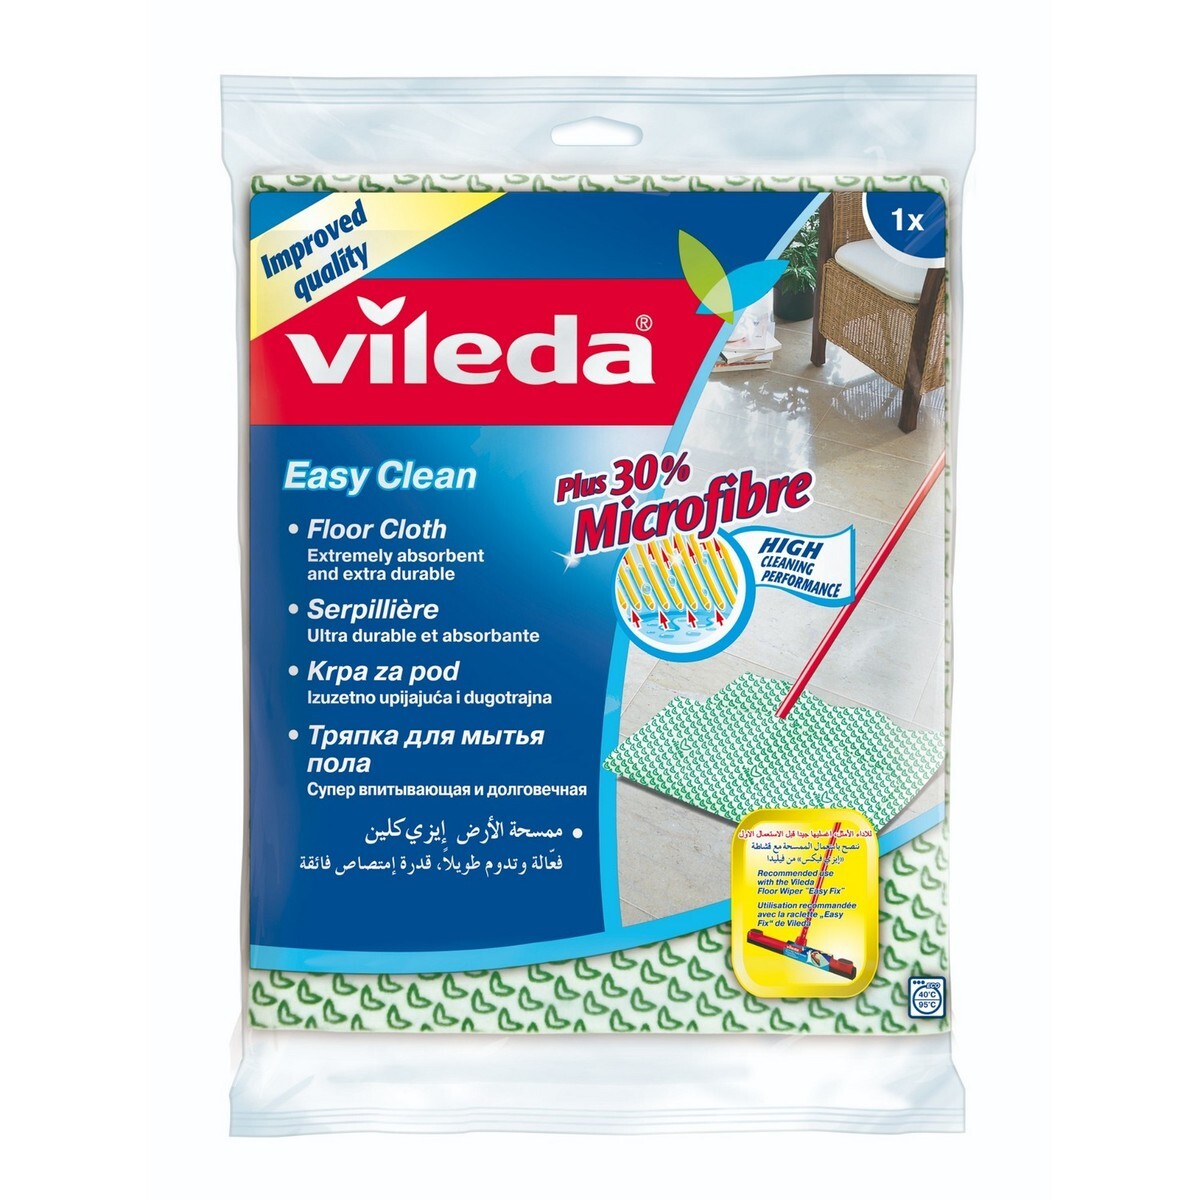 Vileda Wet & Dry Floor Wiper with Stick + Microfibre Cleaning and Drying Cloth